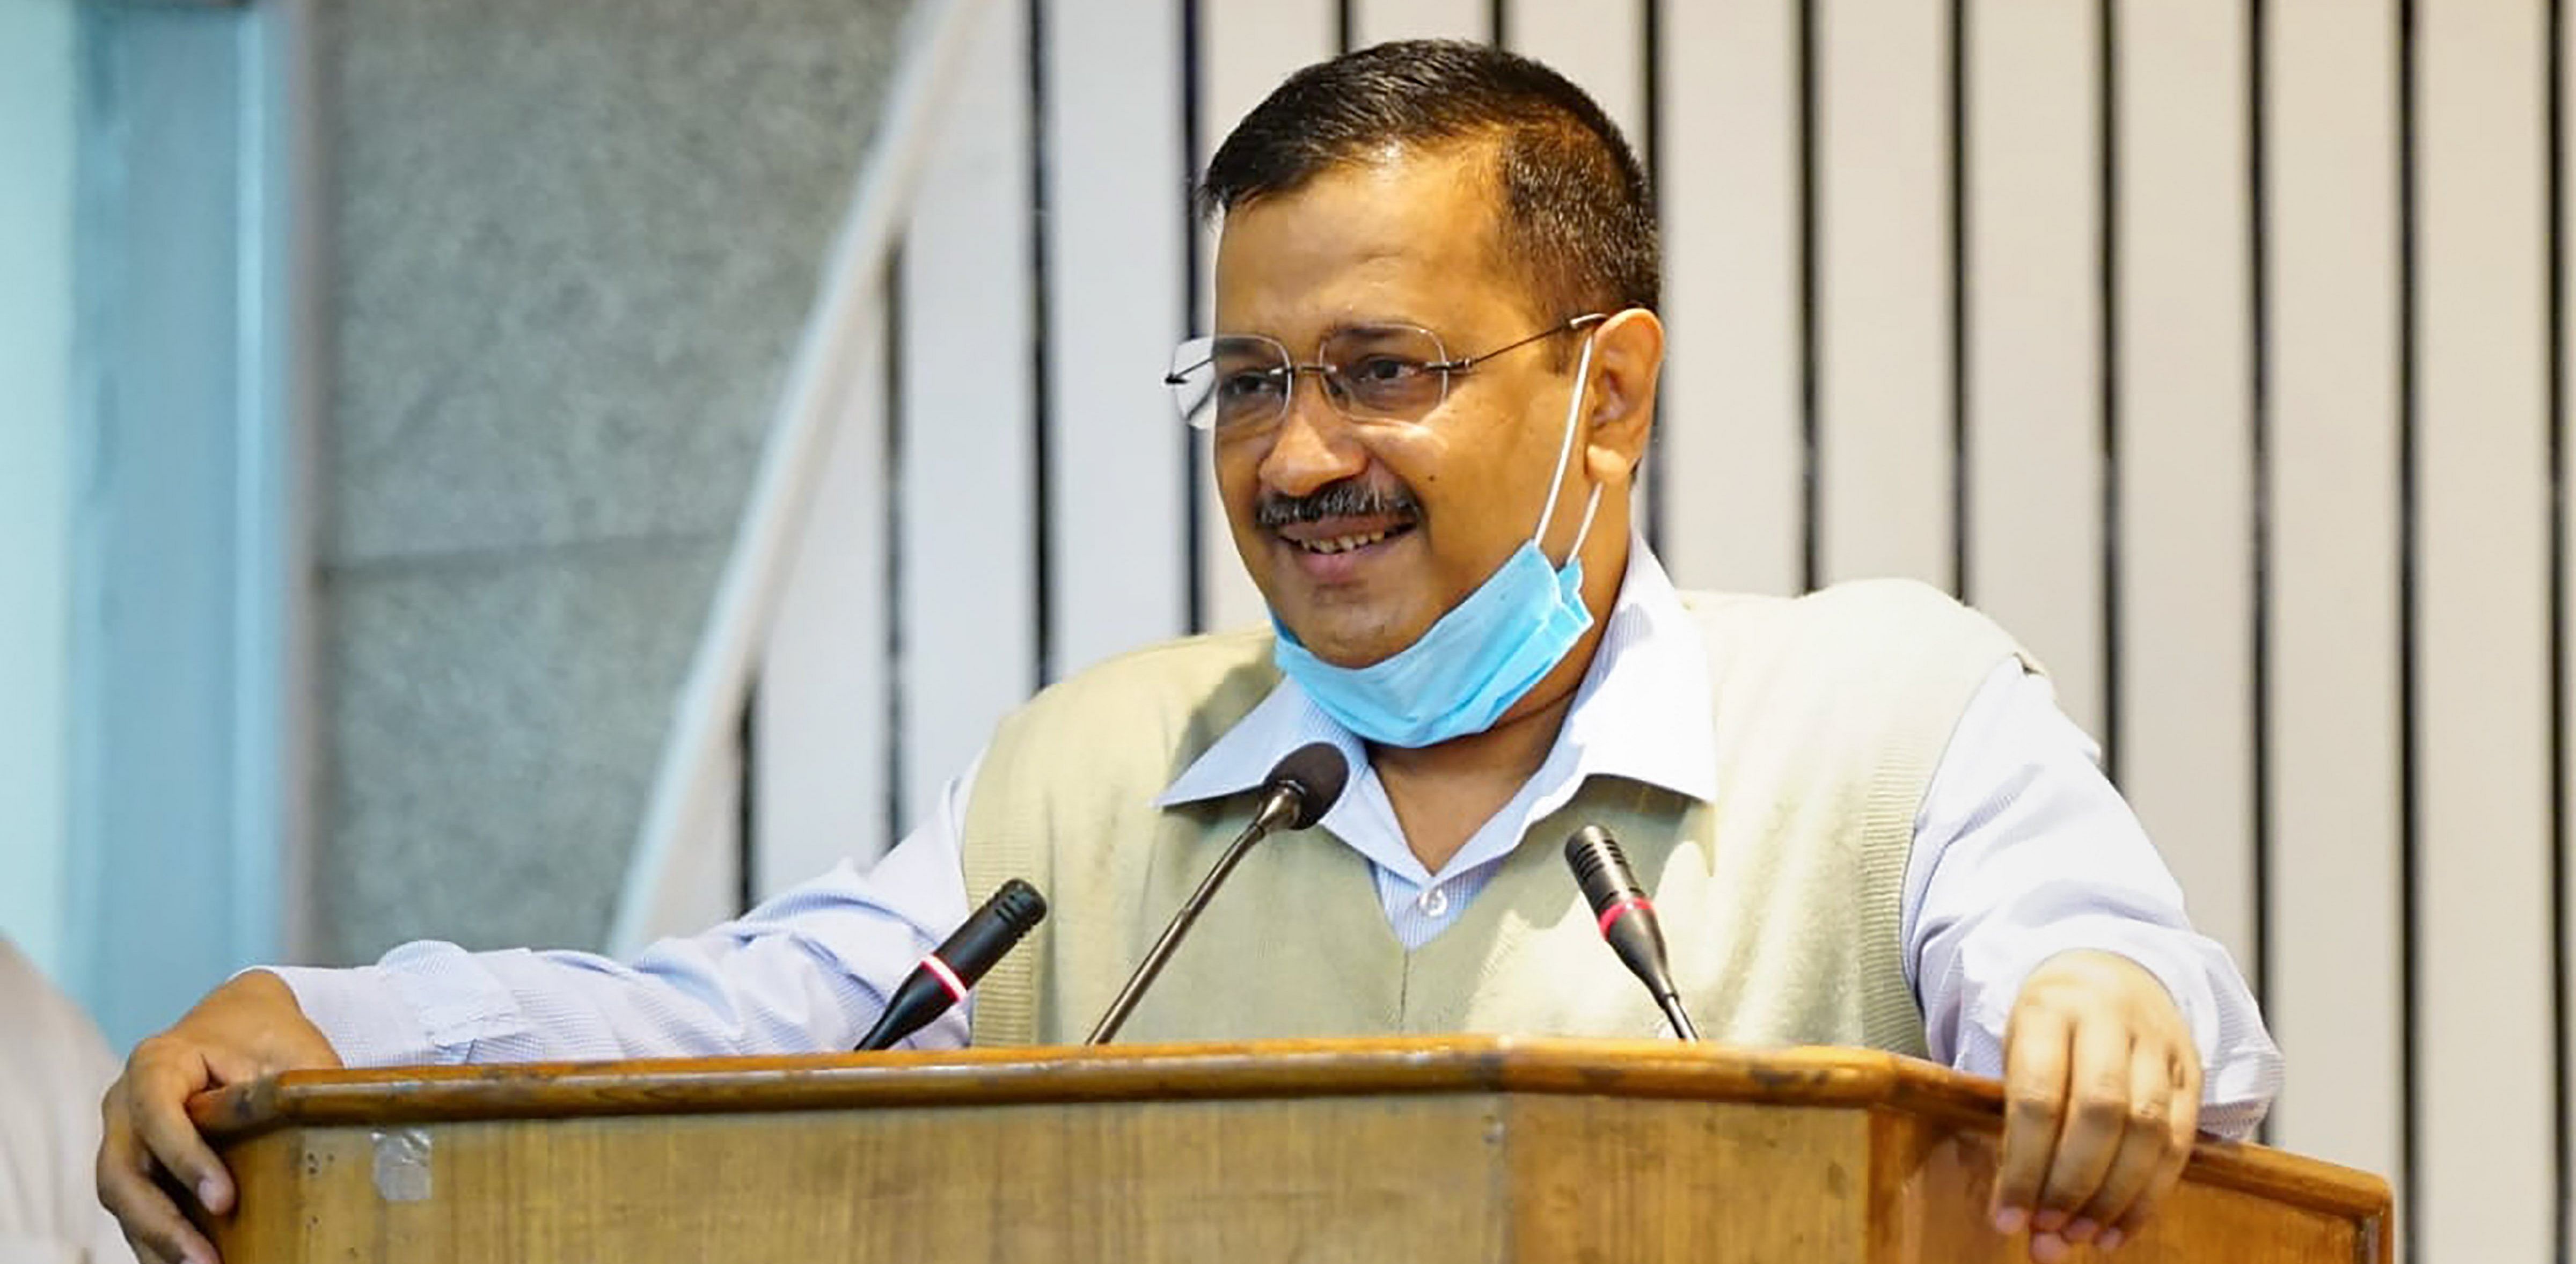 The total amount spent by the Kejriwal government could be a little more than the estimate of Rs 511.78 crore as the analysis does not include the amount his government spent during the 49-day government in 2013 and around one and half months in 2014-15. Credit: PTI